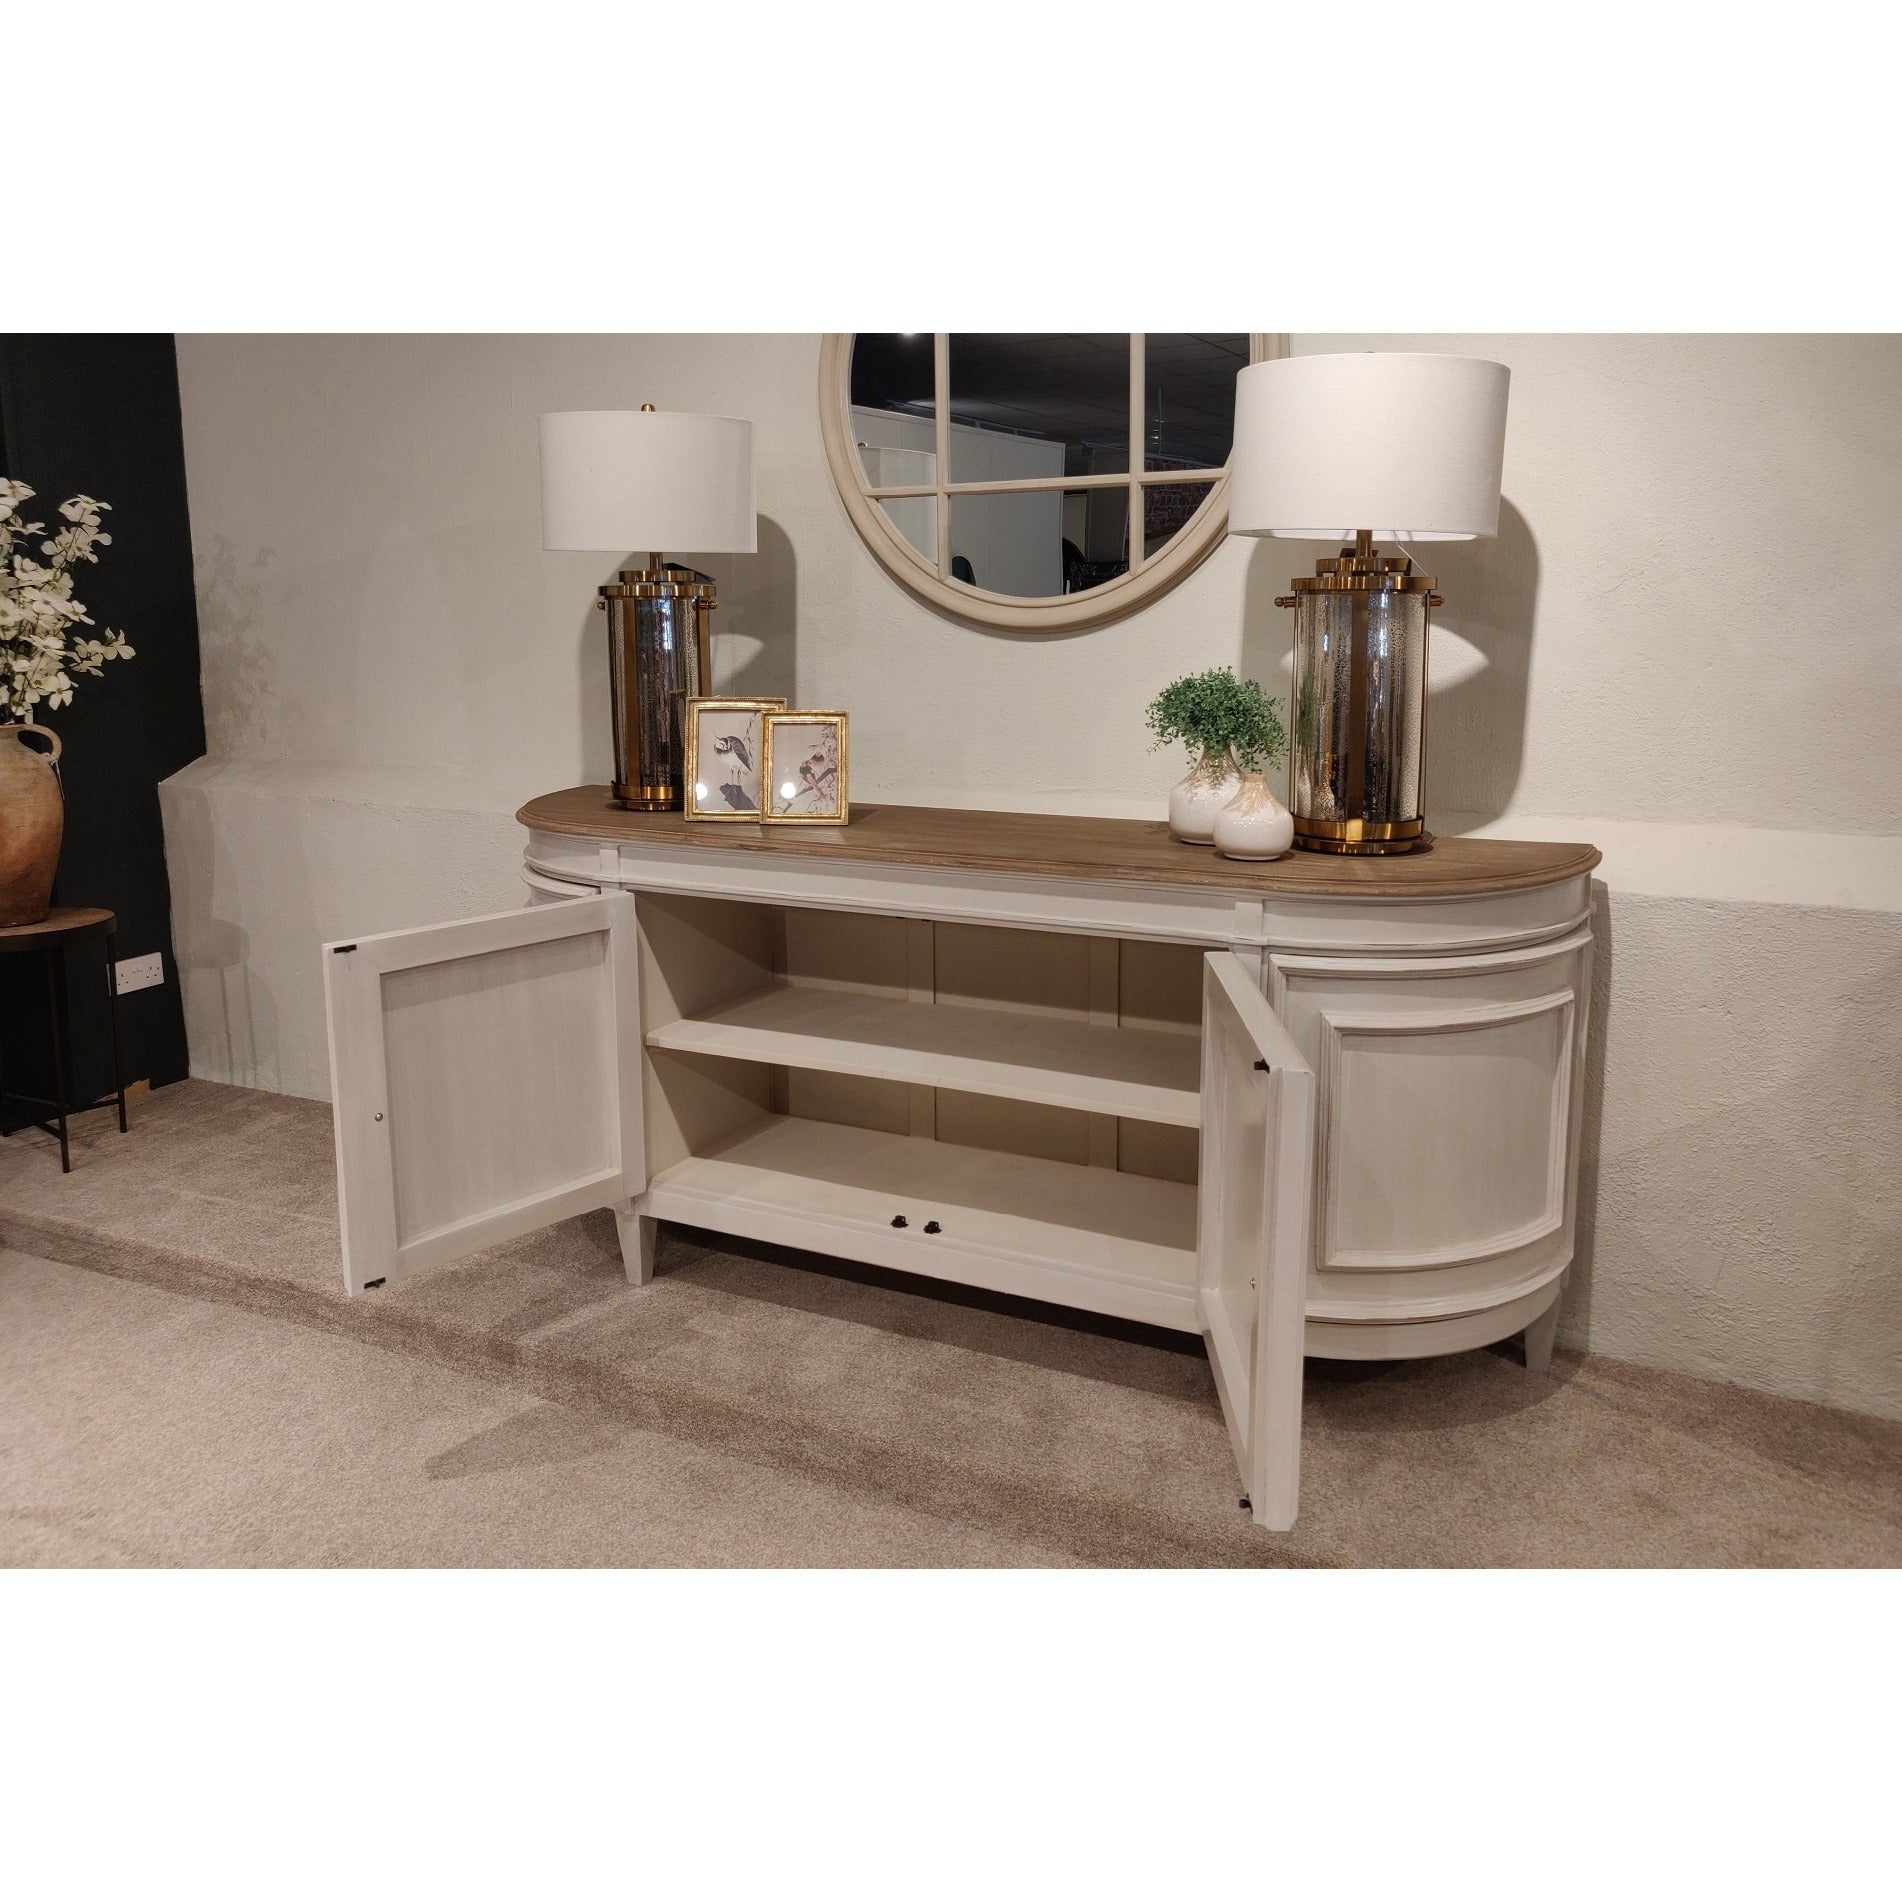 Washington Sideboard from Upstairs Downstairs Furniture in Lisburn, Monaghan and Enniskillen